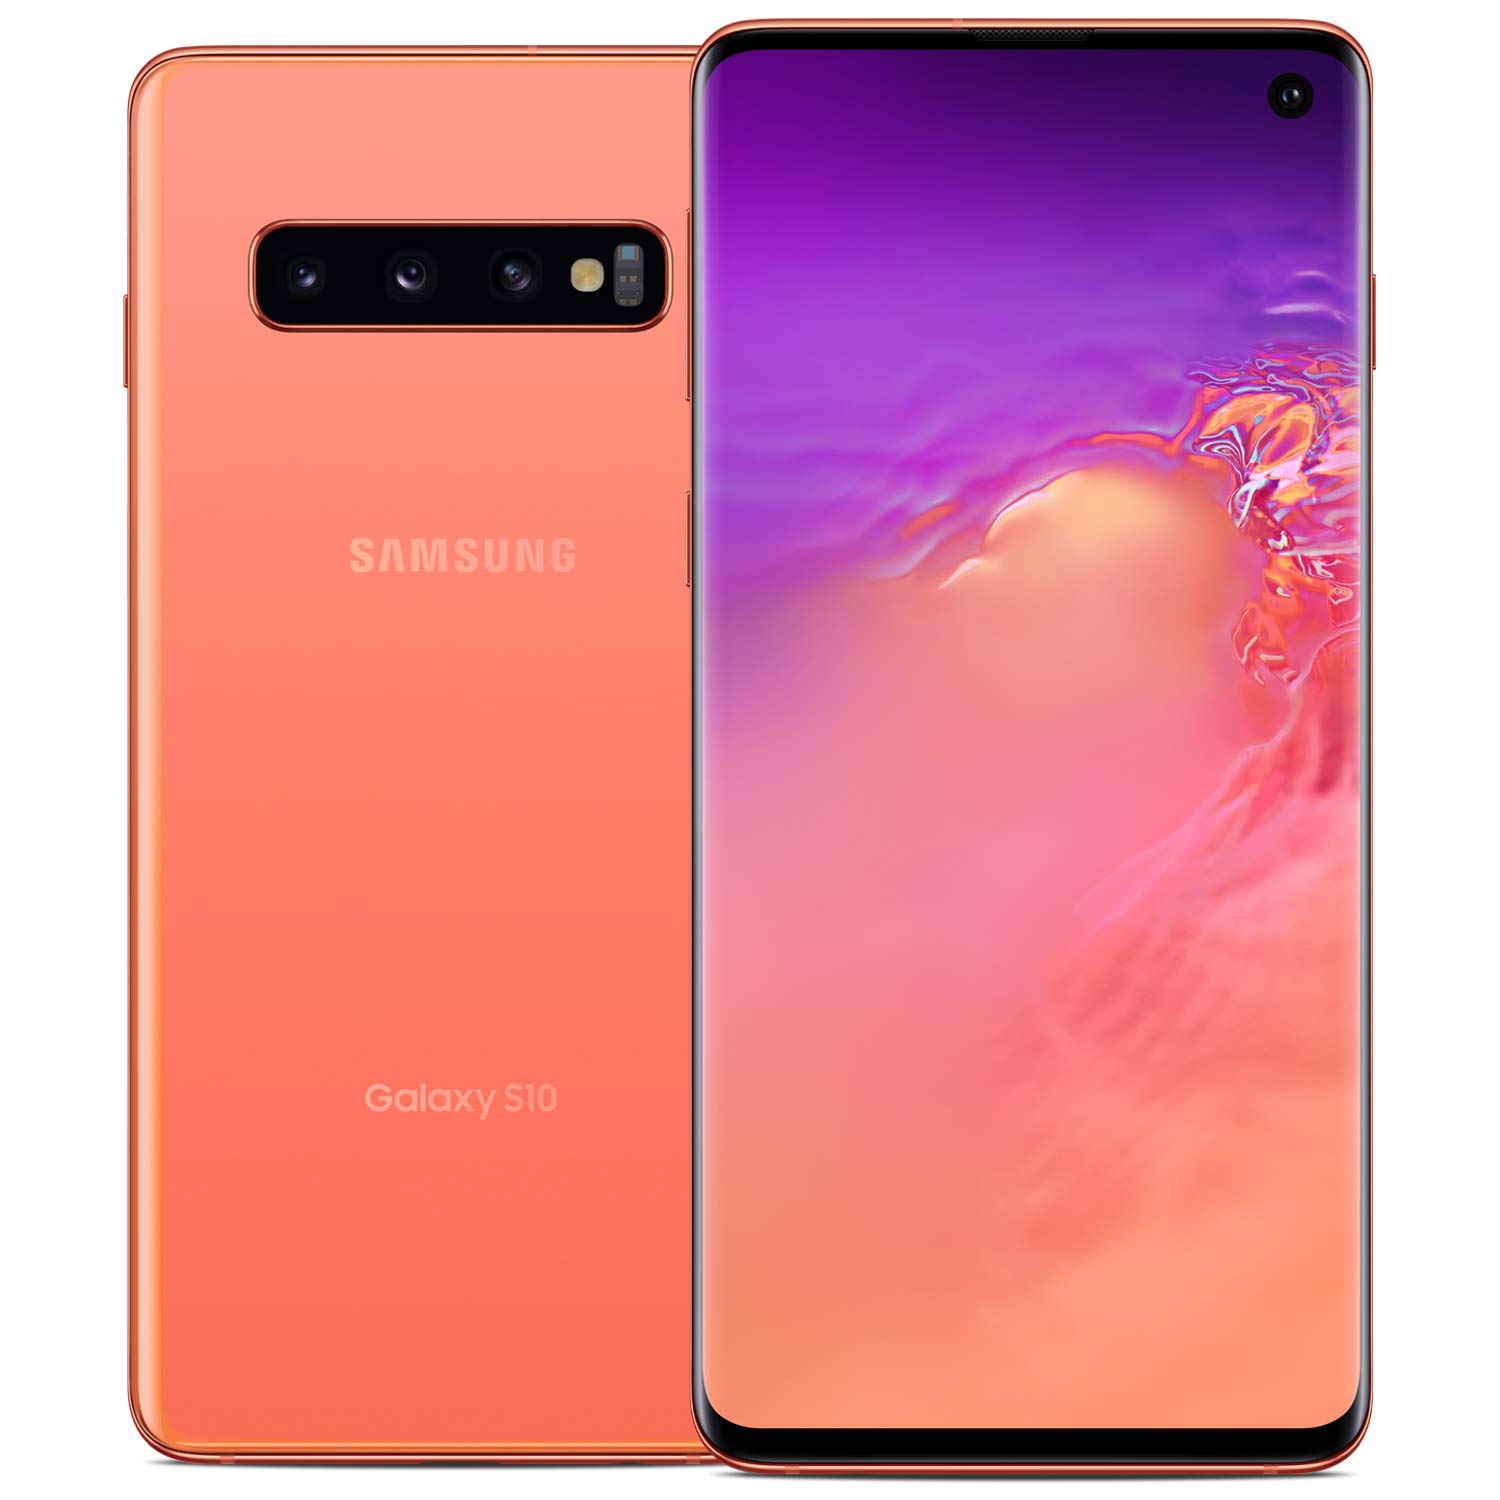 Pre-Owned Samsung GALAXY S10 SM-G973U1 128GB Pink (US Model) - Factory Unlocked Cell Phone (Refurbished: Like New) - image 3 of 6